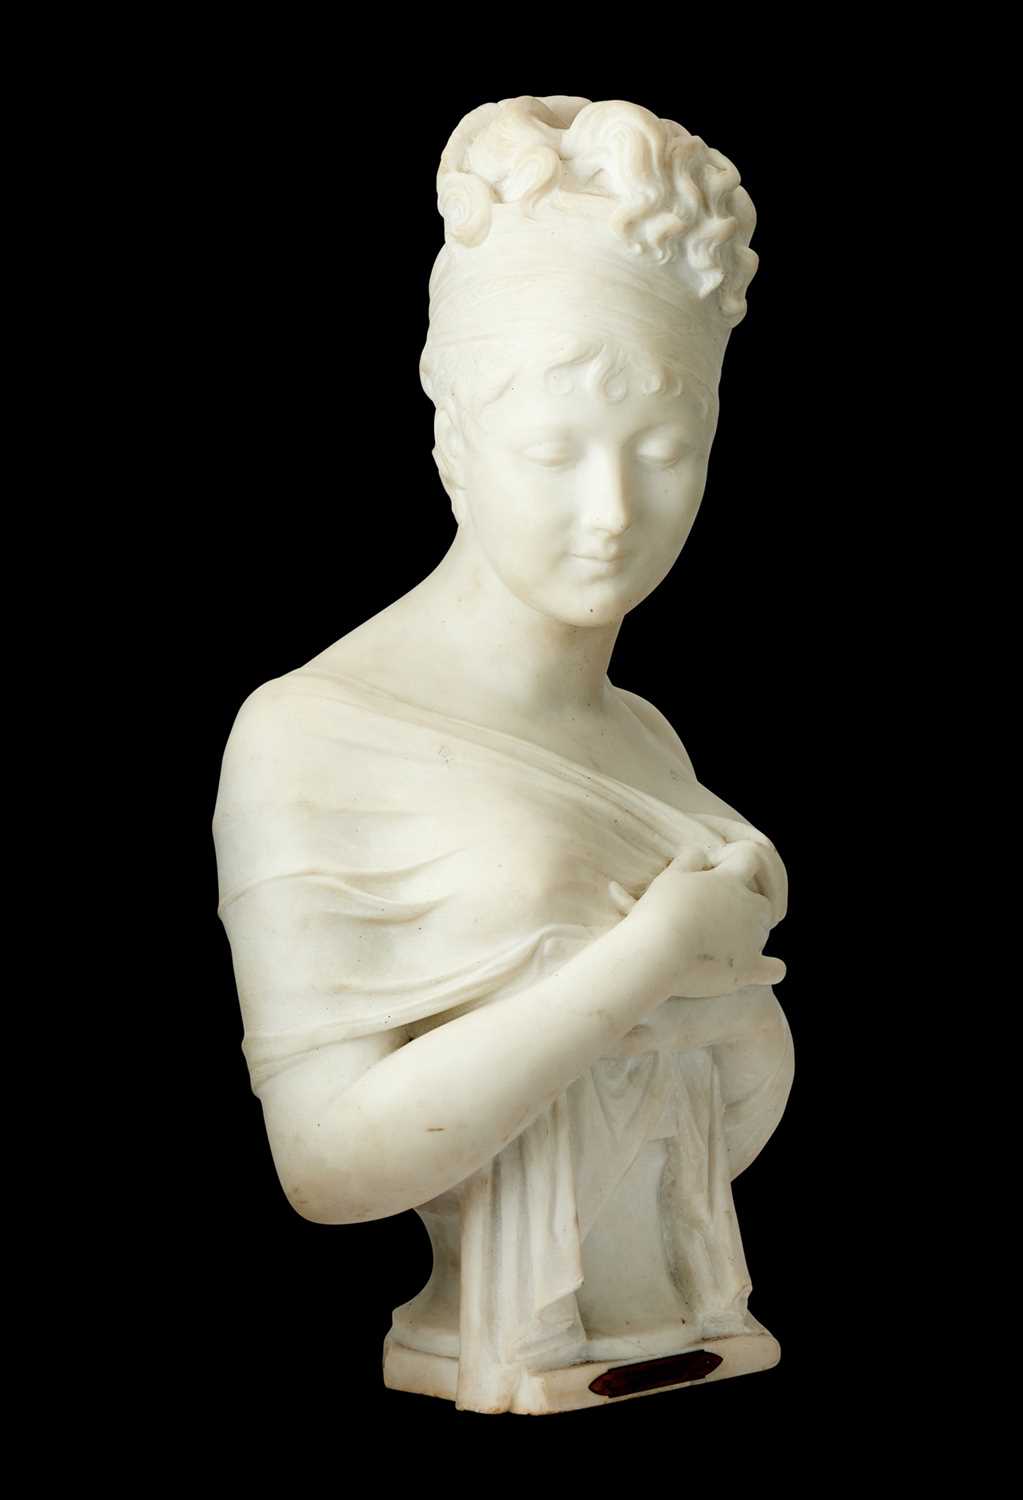 AFTER JOSEPH CHINARD (FRENCH, 1756-1813): A LATE 19TH CENTURY MARBLE BUST OF MADAME RECAMIER - Image 2 of 3